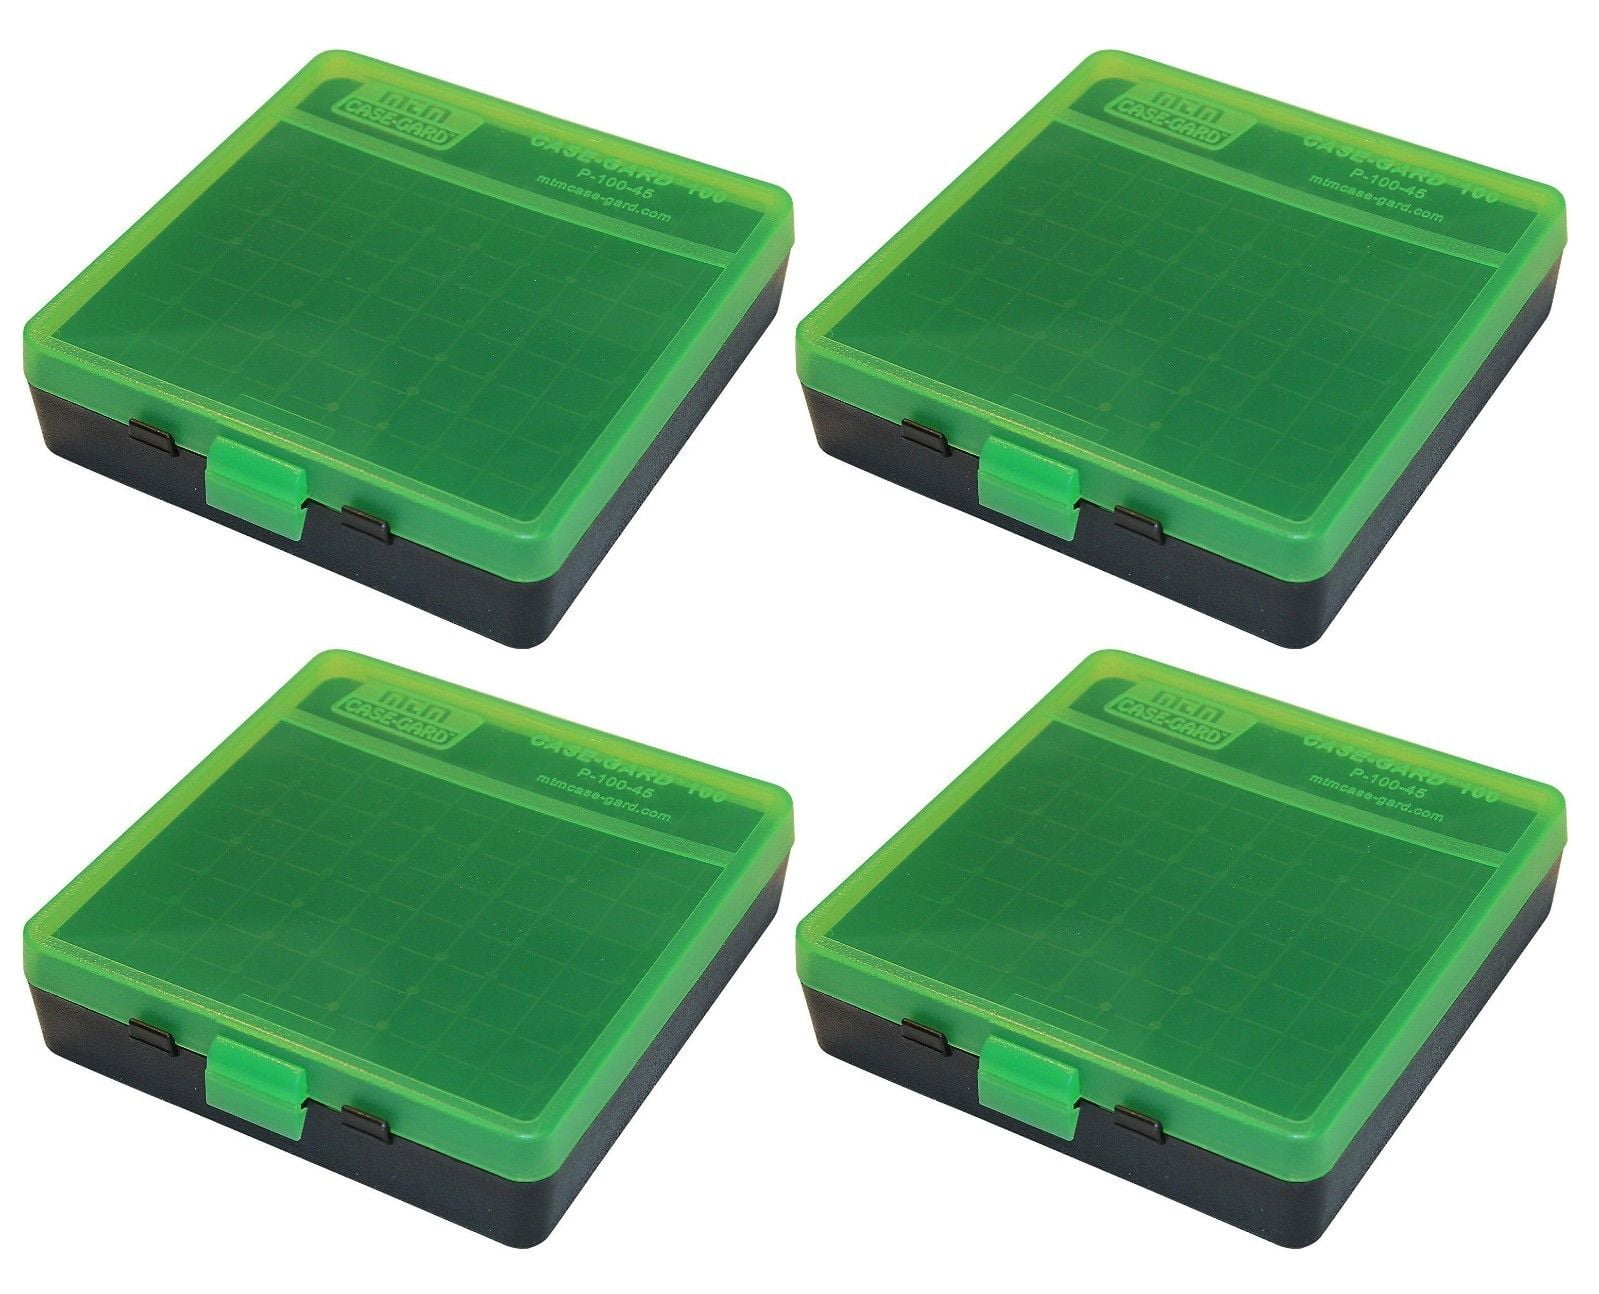 5 x 40 S&W Storage 100 Rnd Boxes CLEAR COLOR 10mm Ammo Box 45 ACP Case 